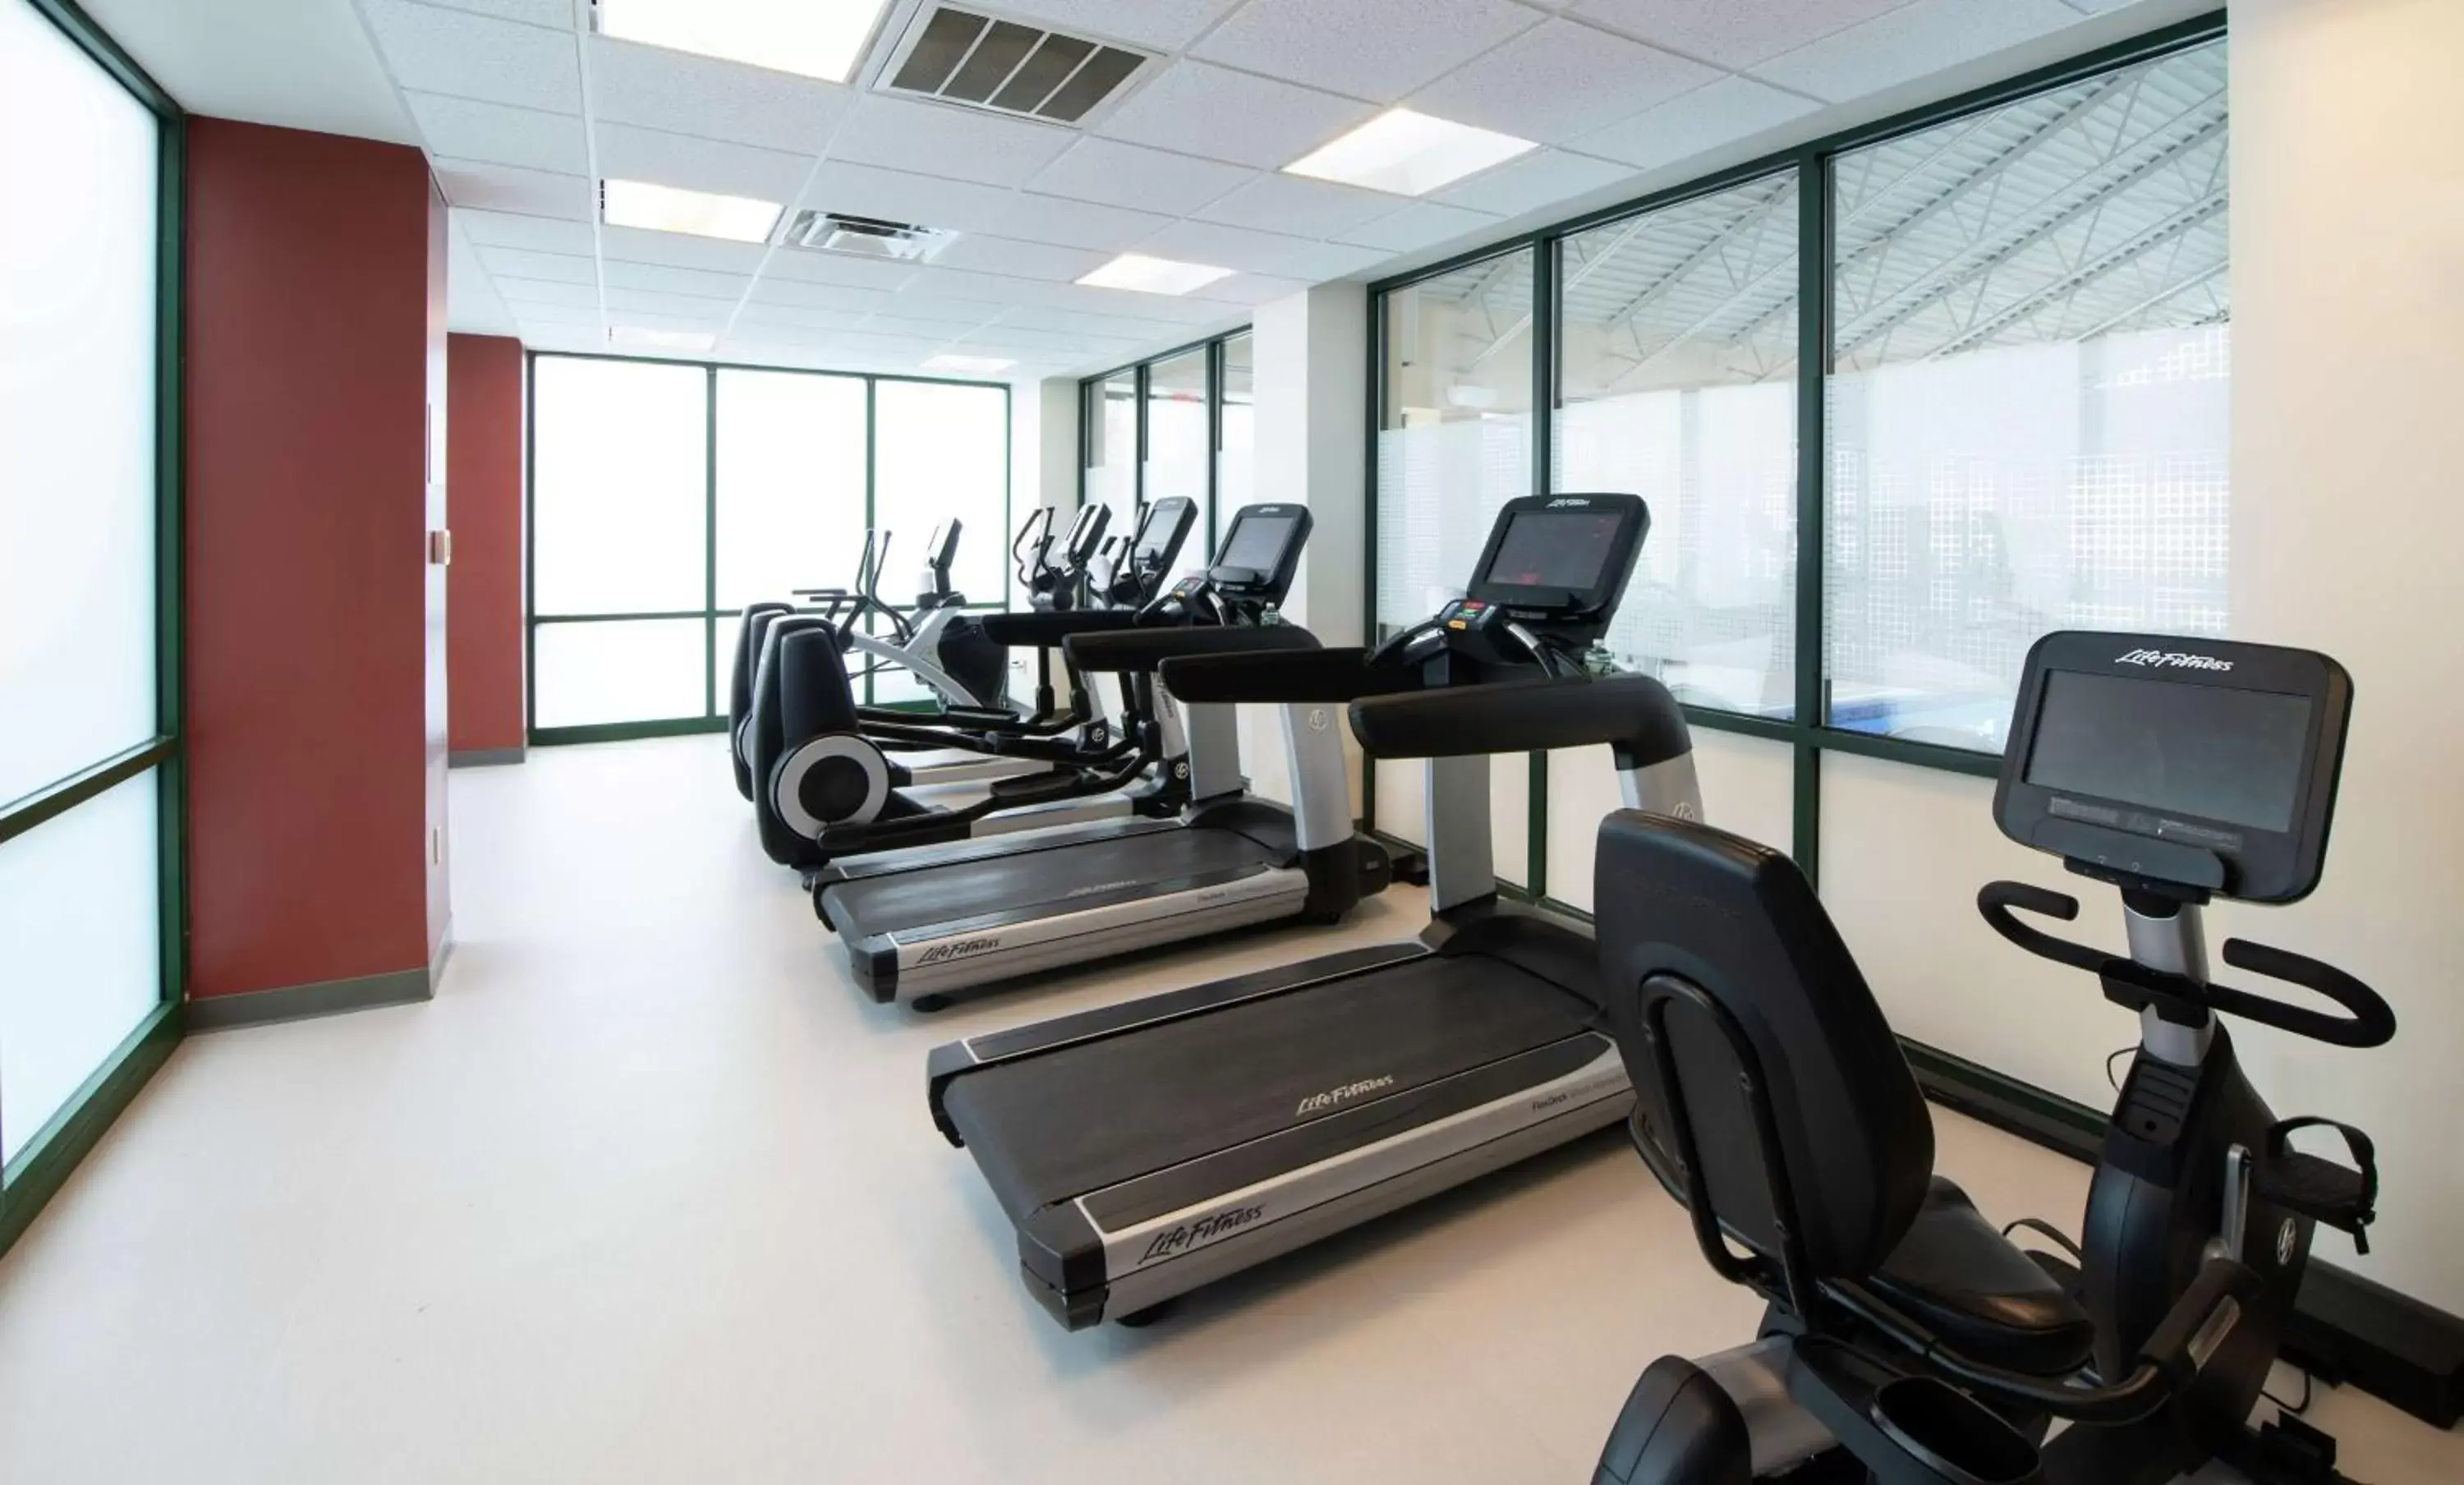 Fitness centre/facilities, Fitness Center/Facilities in DoubleTree Suites by Hilton Hotel Philadelphia West